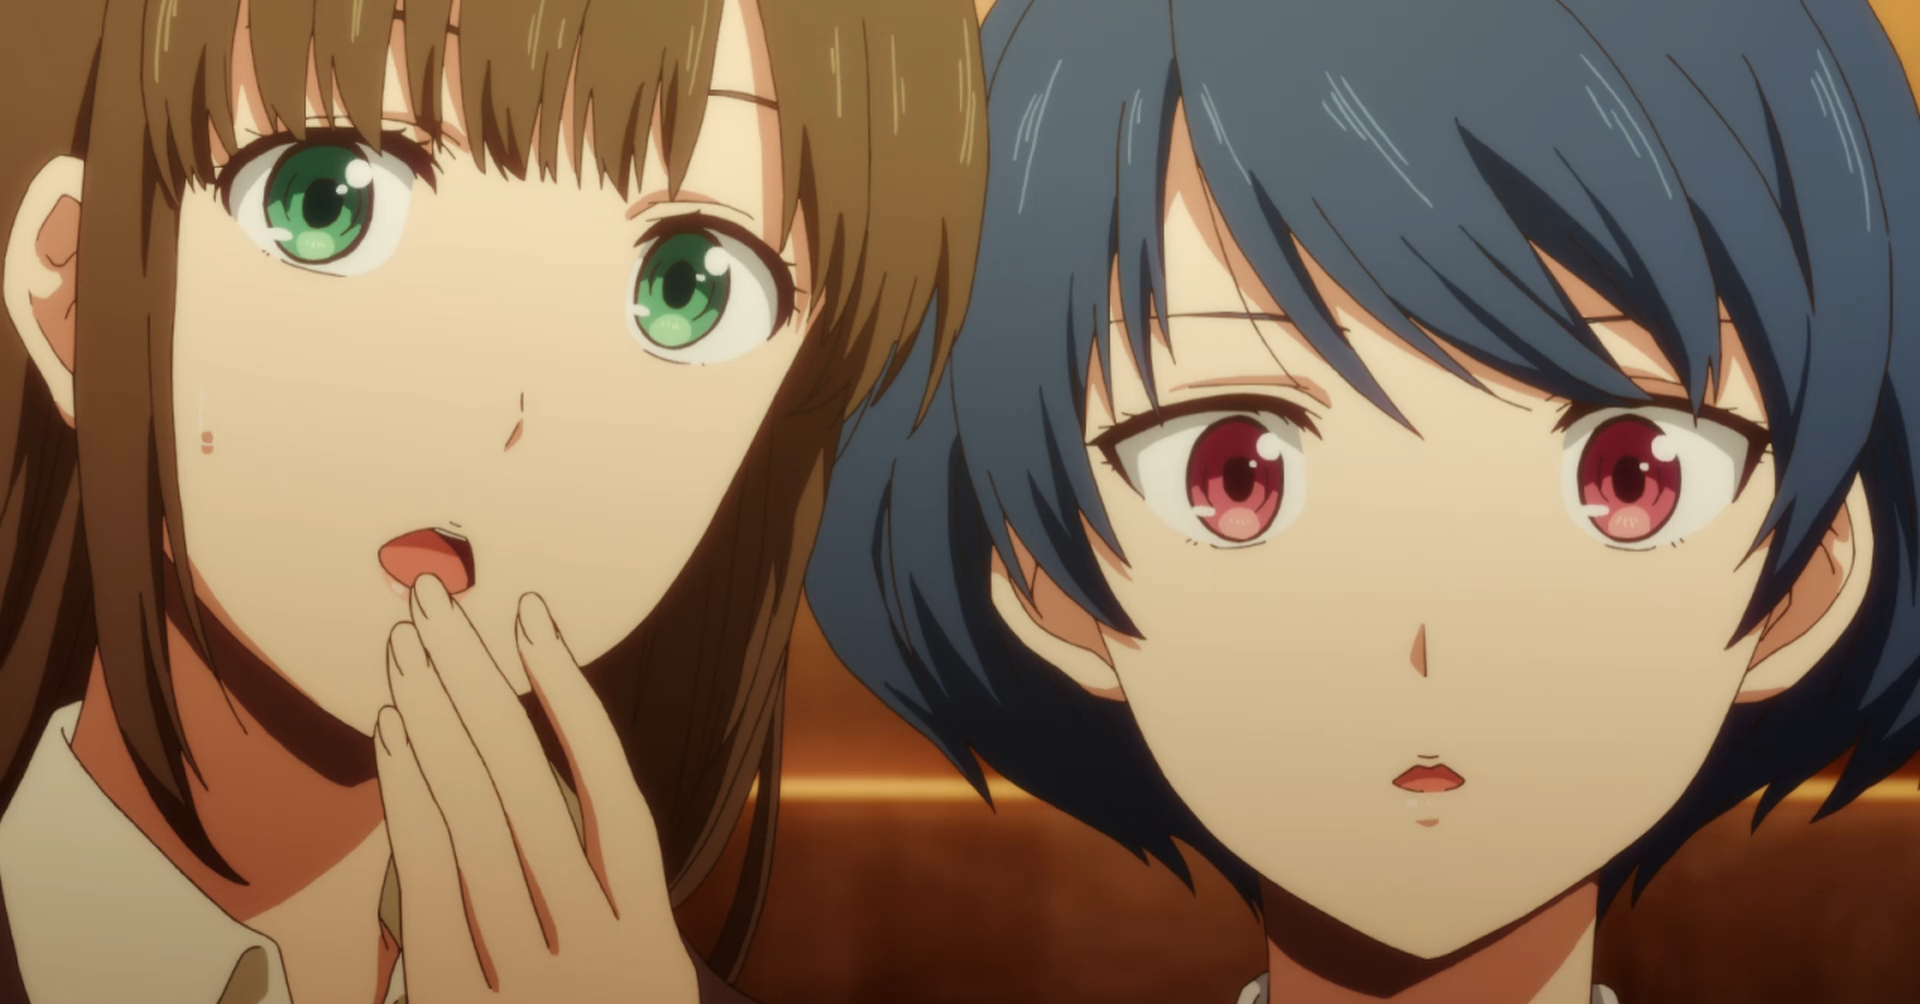 Opening of Domestic Girlfriend Exceeds 100 Million Views - Anime Web